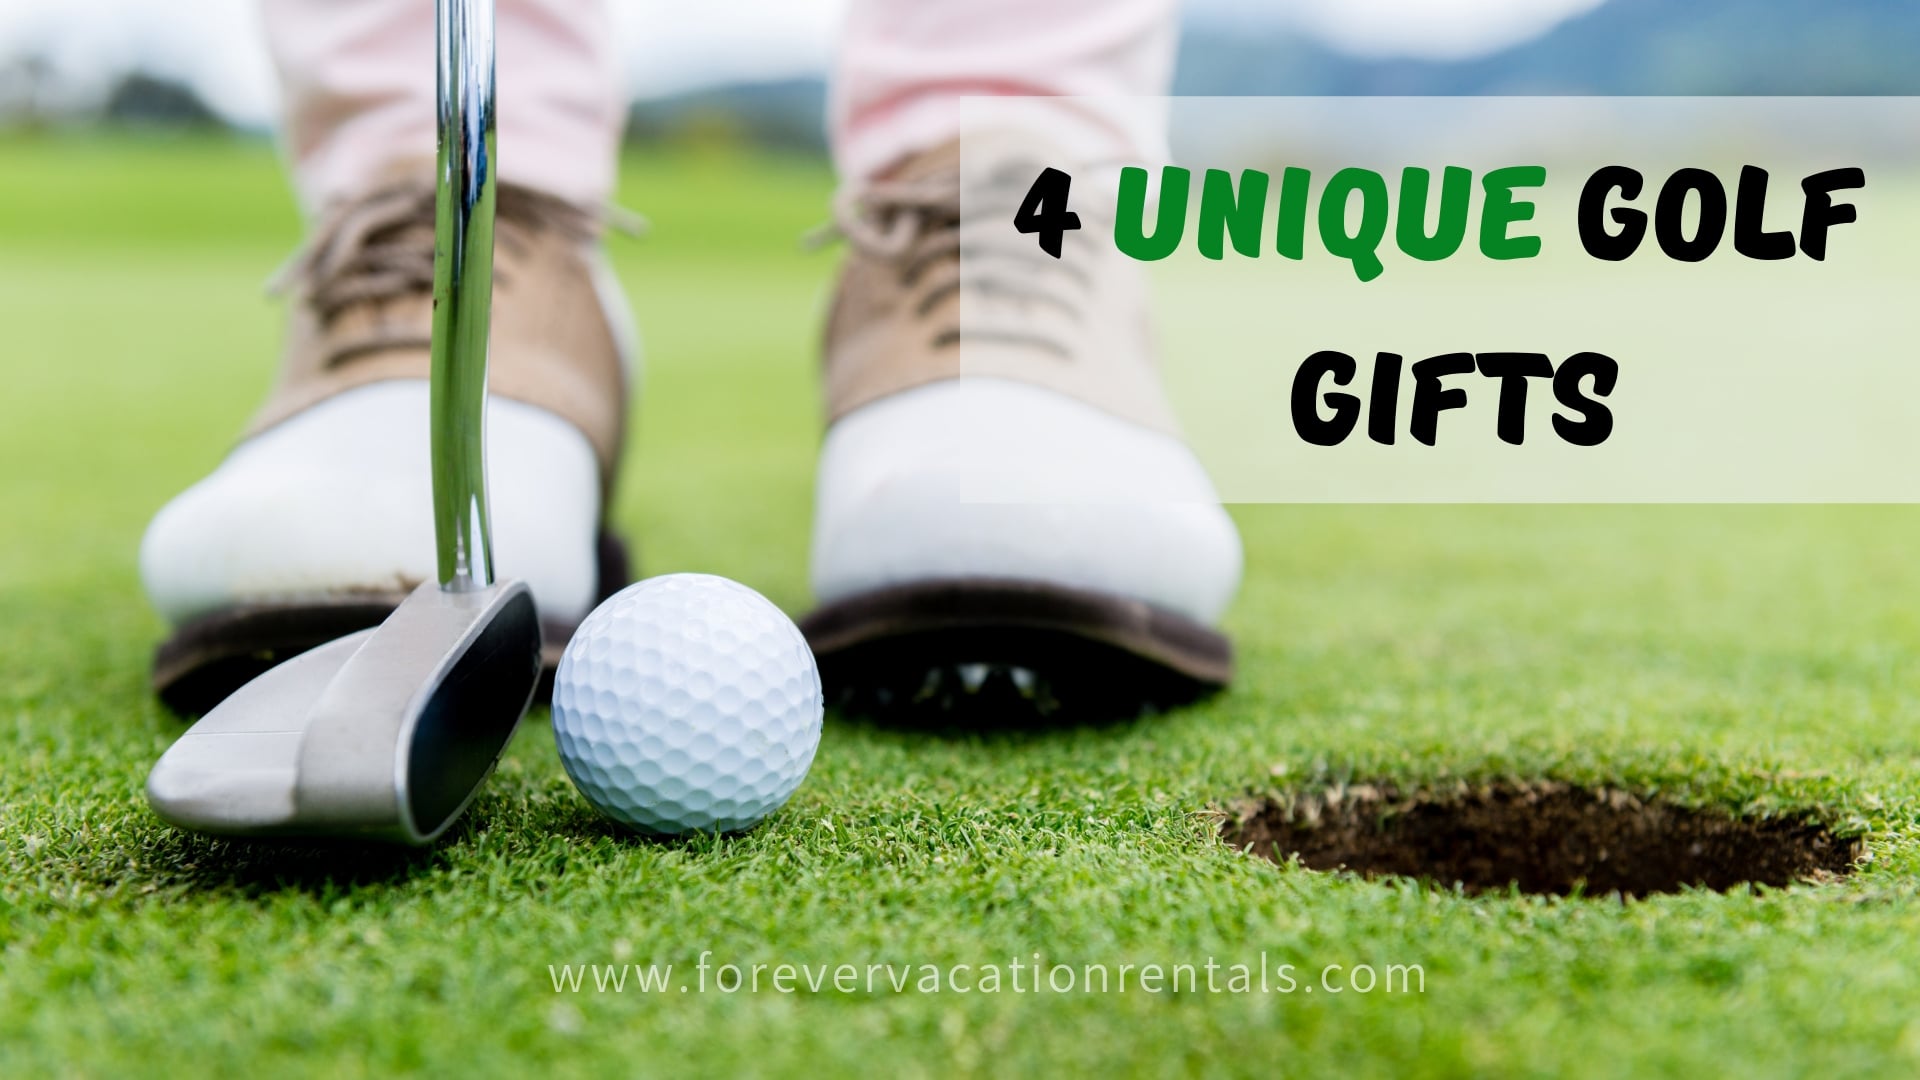 https://www.forevervacationrentals.com/wp-content/uploads/2019/01/Forever-Vacation-Rentals-4-Unique-Golf-Gifts-1.jpg